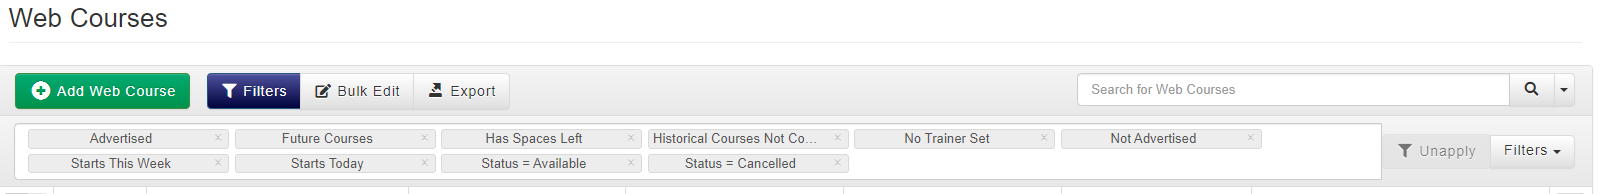 Web Courses filter options